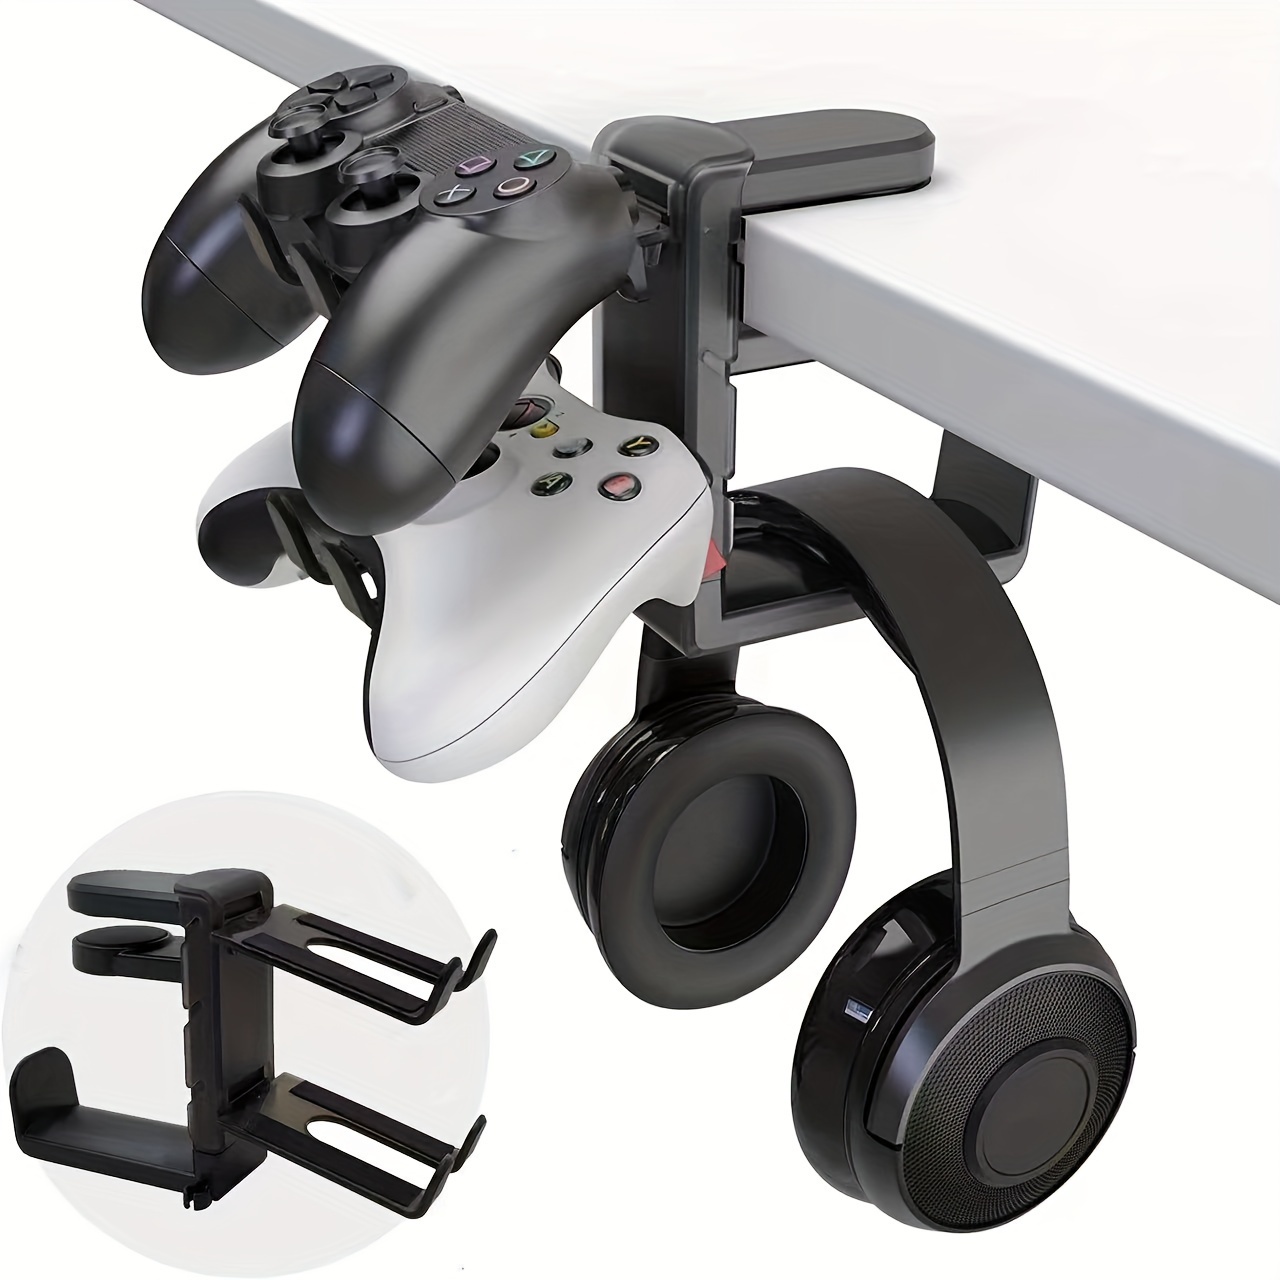 

1pc Gaming Headphone & Controller Holder - Headphones Hanger W/adjustable & Rotating Arm Clamp, Headphone Stand Under Desk, Universal Headset Controllers Hook With Cable Organizer